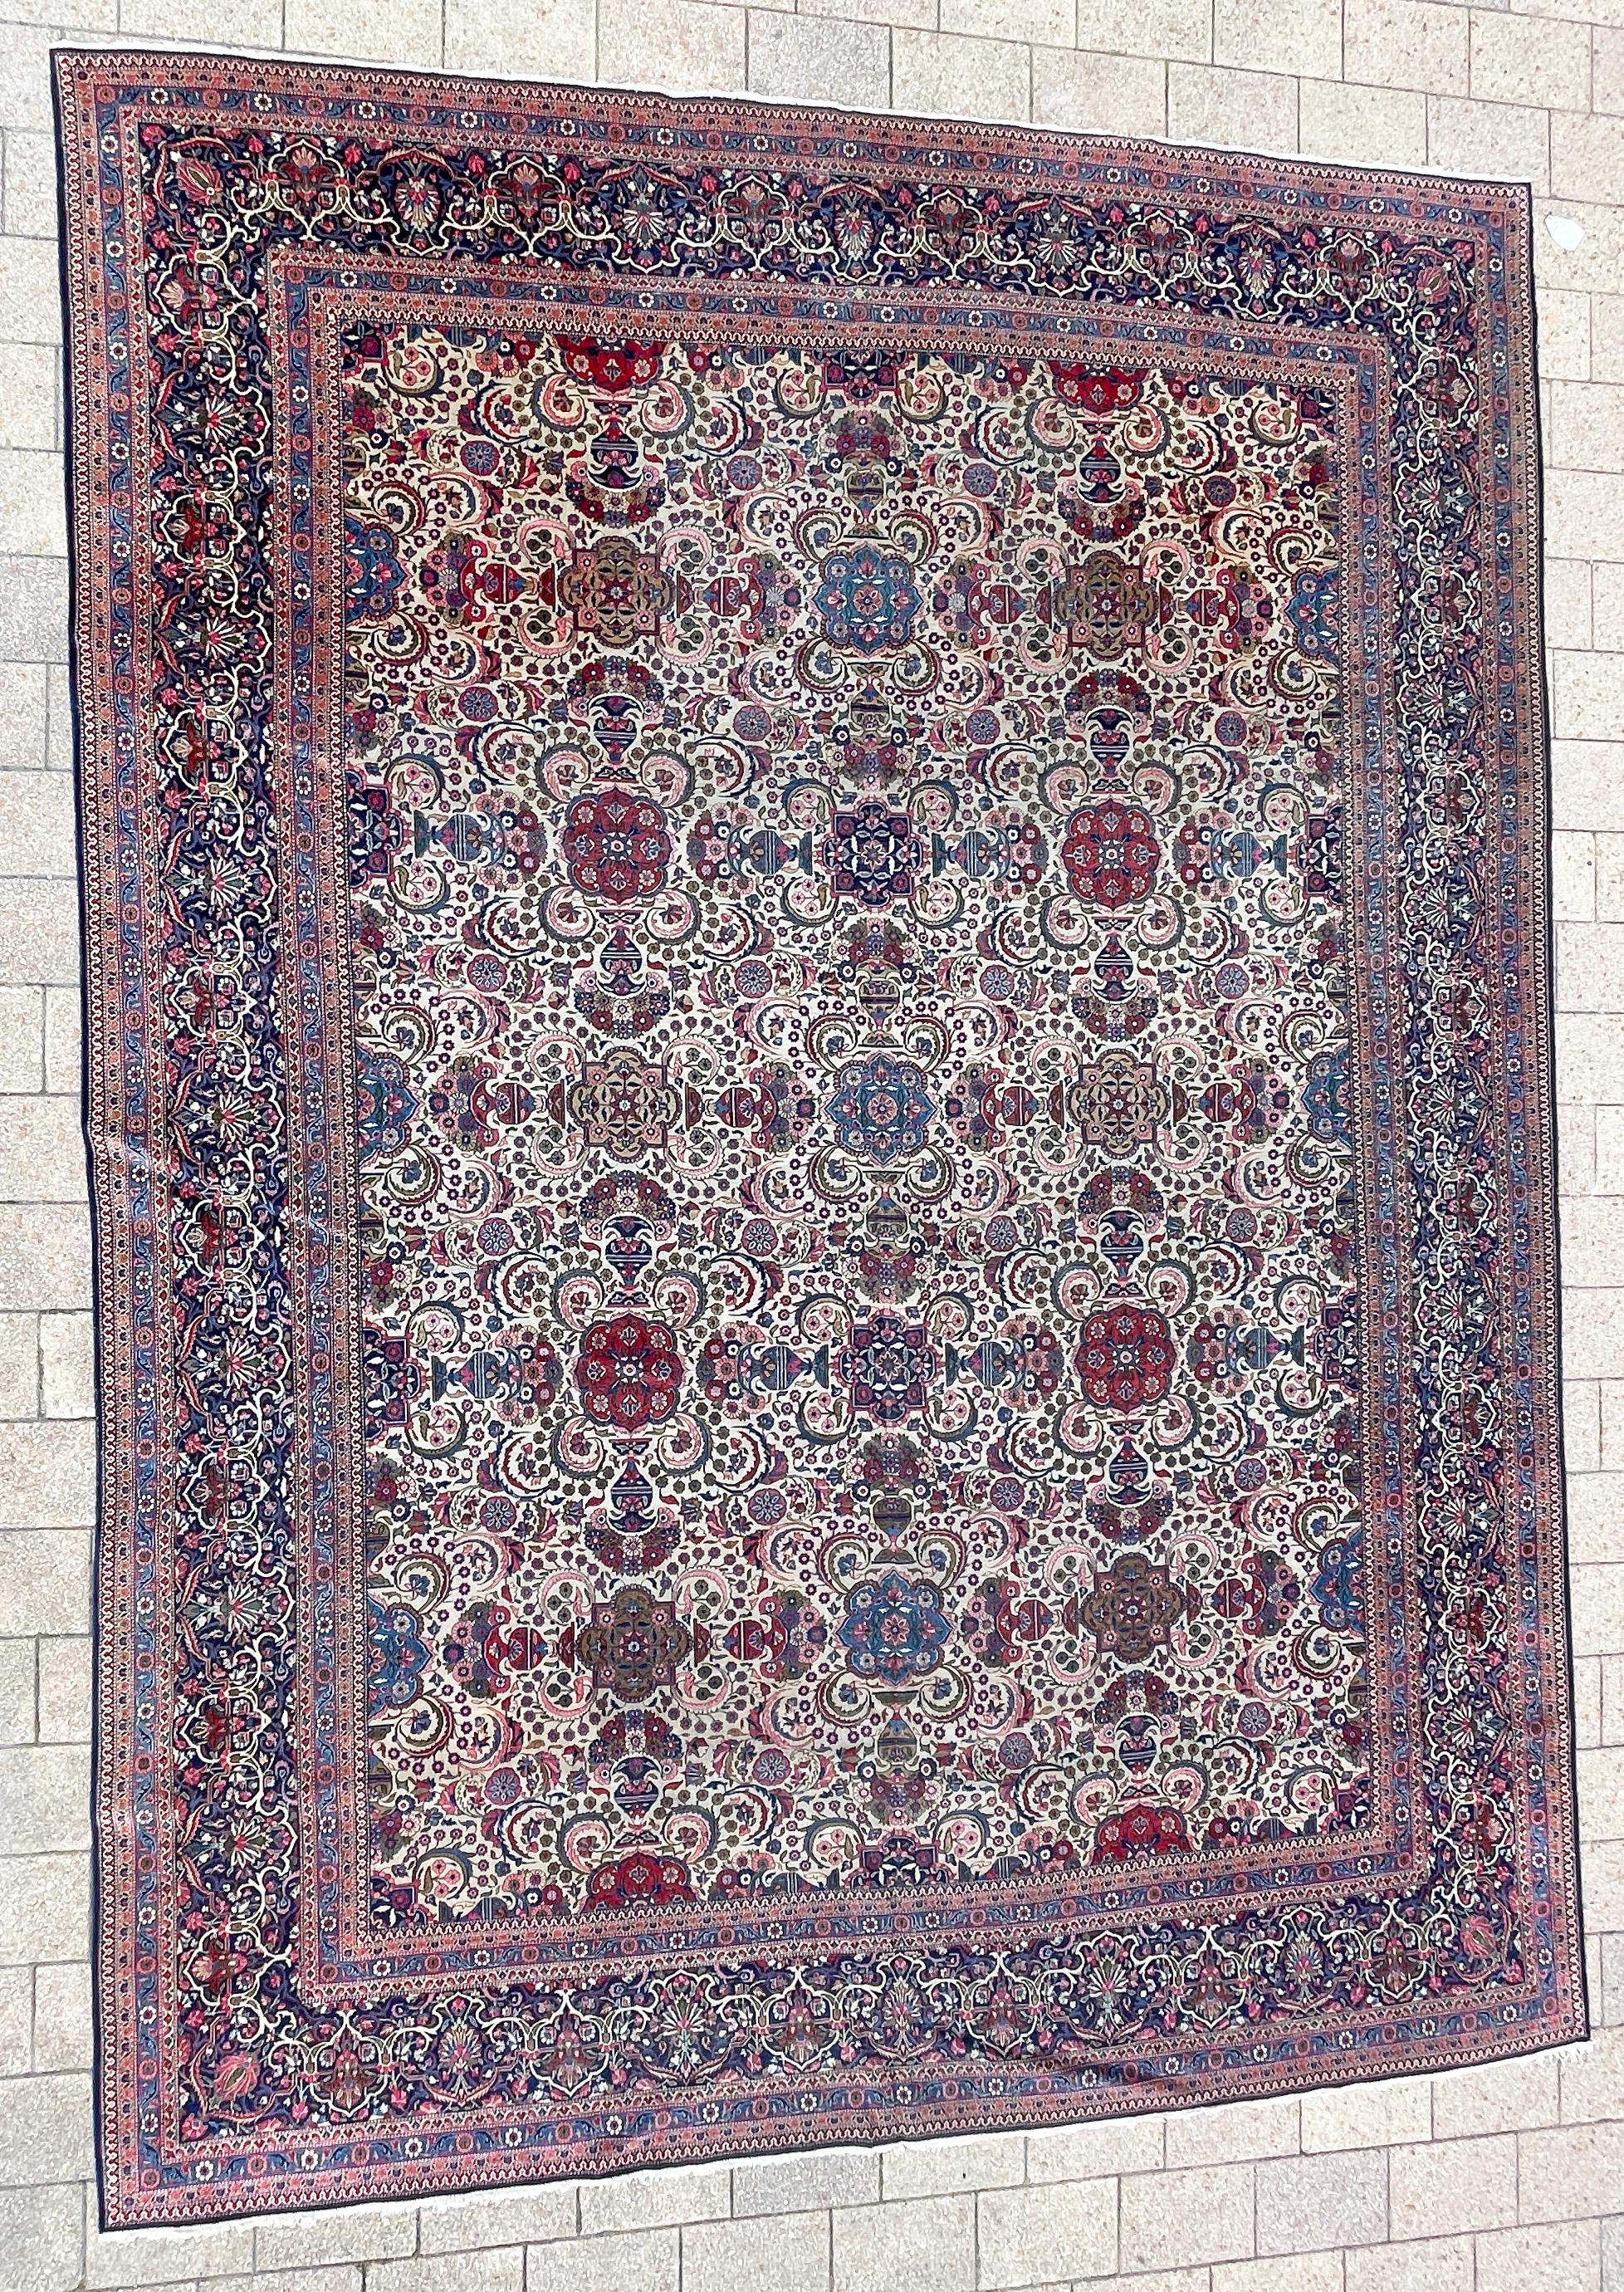 
You could possess an exquisite antique Persian Dabir Kashan carpet steeped in a captivating history. This eloquent portrayal highlights the intricate features of the rug, encompassing an ivory background, a striking blue border, and an elaborate